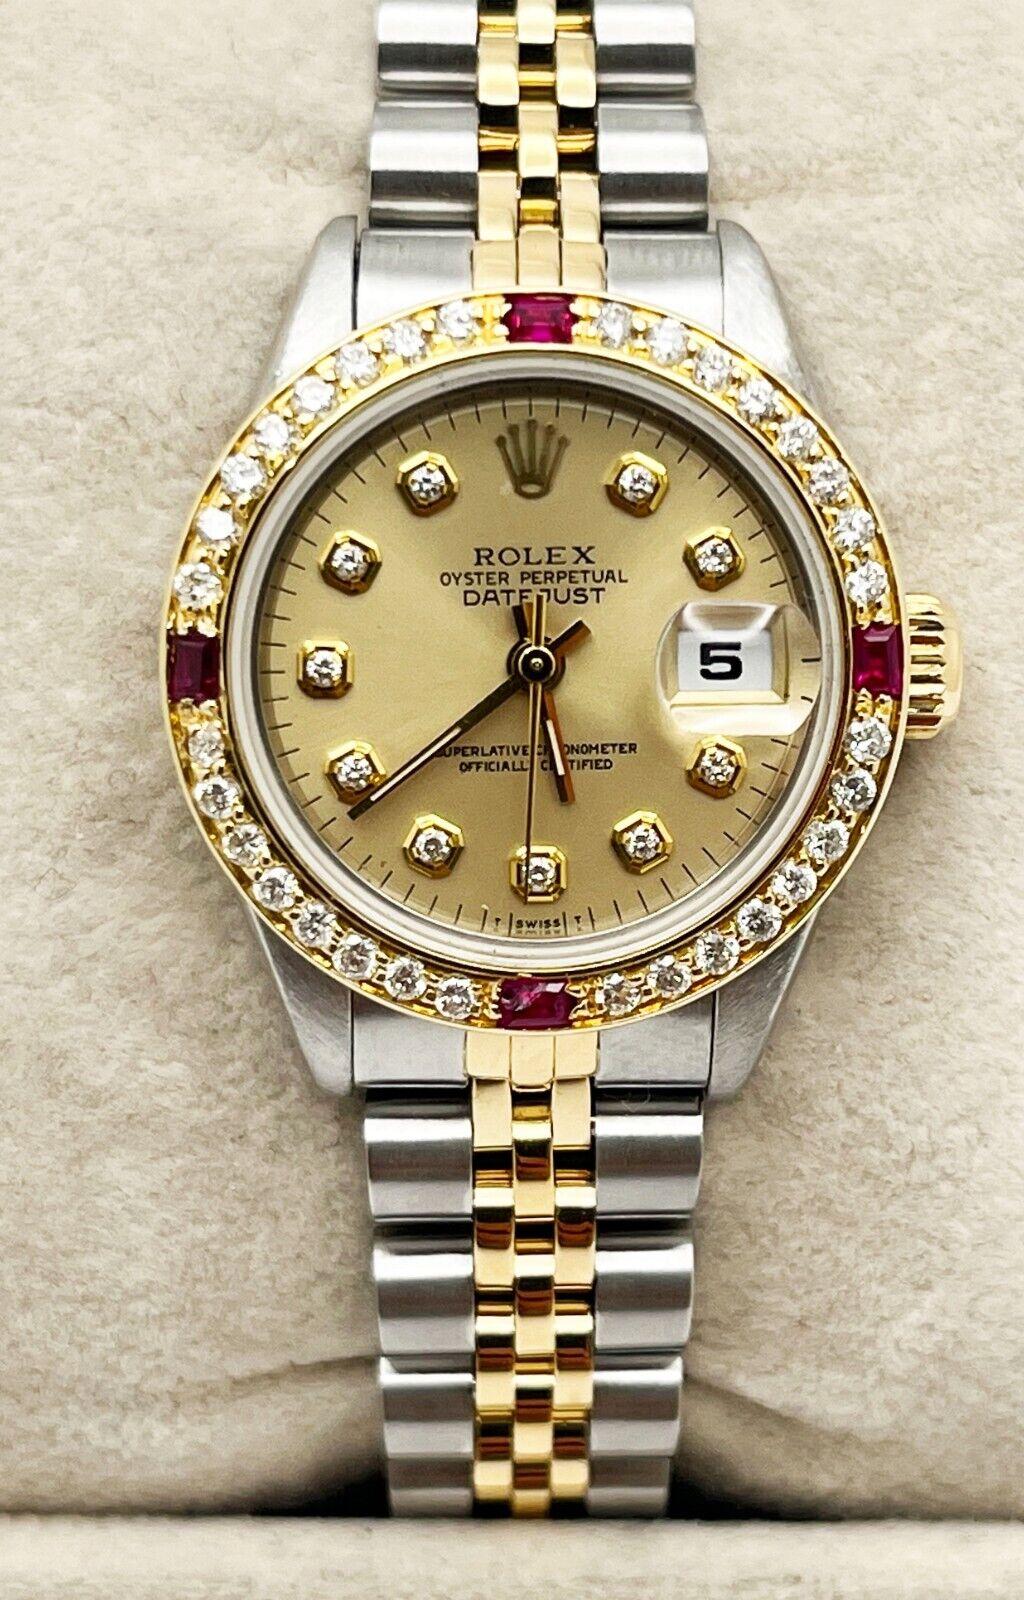 Style Number: 69173

Serial: L816***

Year: 1989
 
Model: Ladies Datejust
 
Case Material: Stainless Steel
 
Band: 18K Yellow Gold & Stainless Steel
 
Bezel: Custom Diamond & Ruby Bezel
 
Dial: Custom Diamond Dial
 
Face: Sapphire Crystal
 
Case